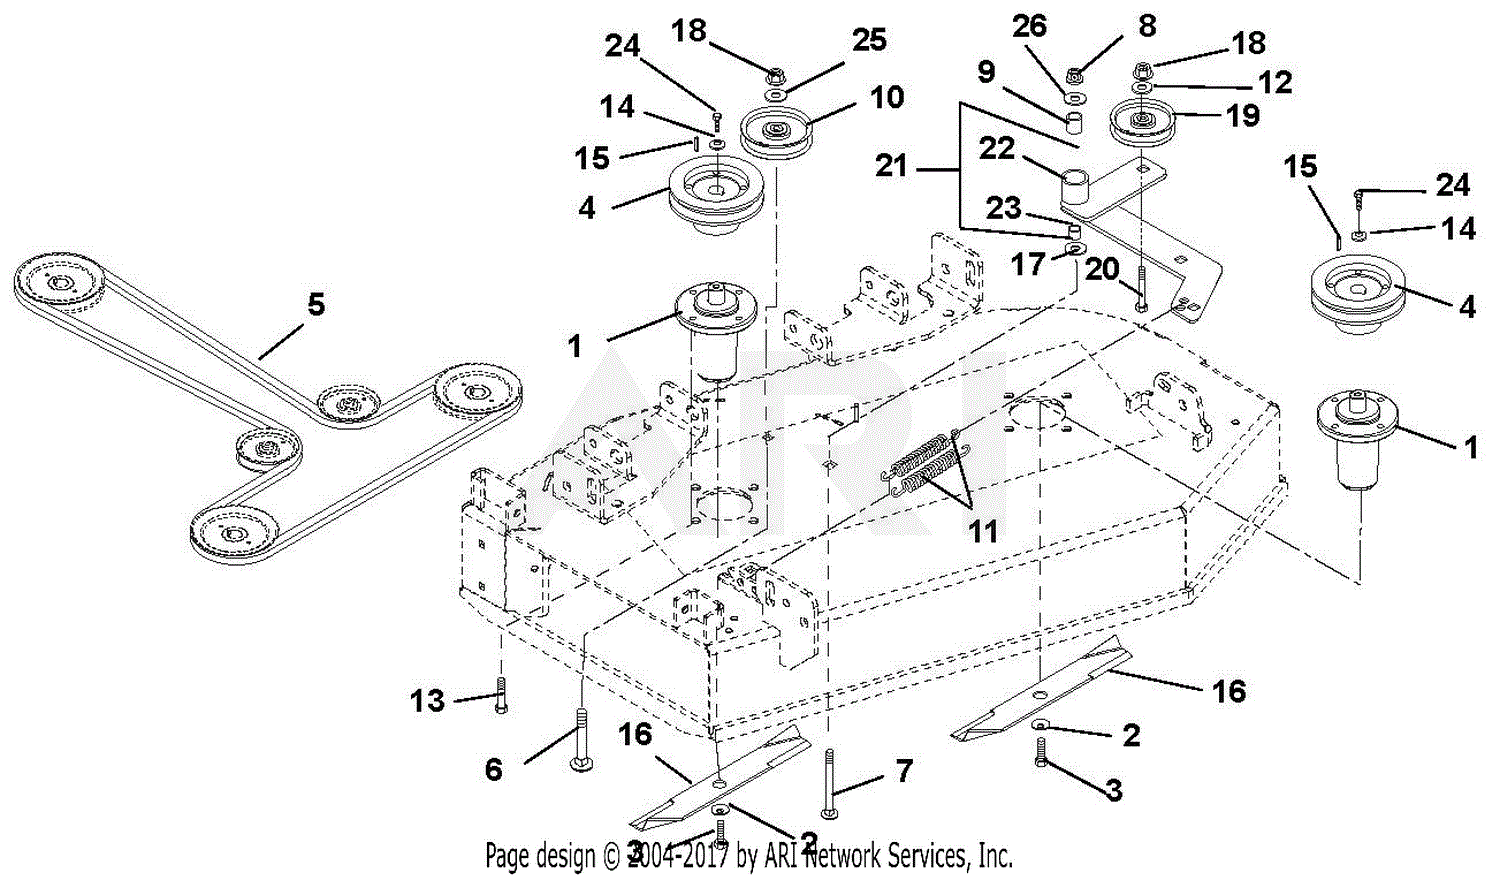 Gravely 991088 041000 049999 Compact Pro 34 Parts Diagram For Belts Spindles Idlers And Blades